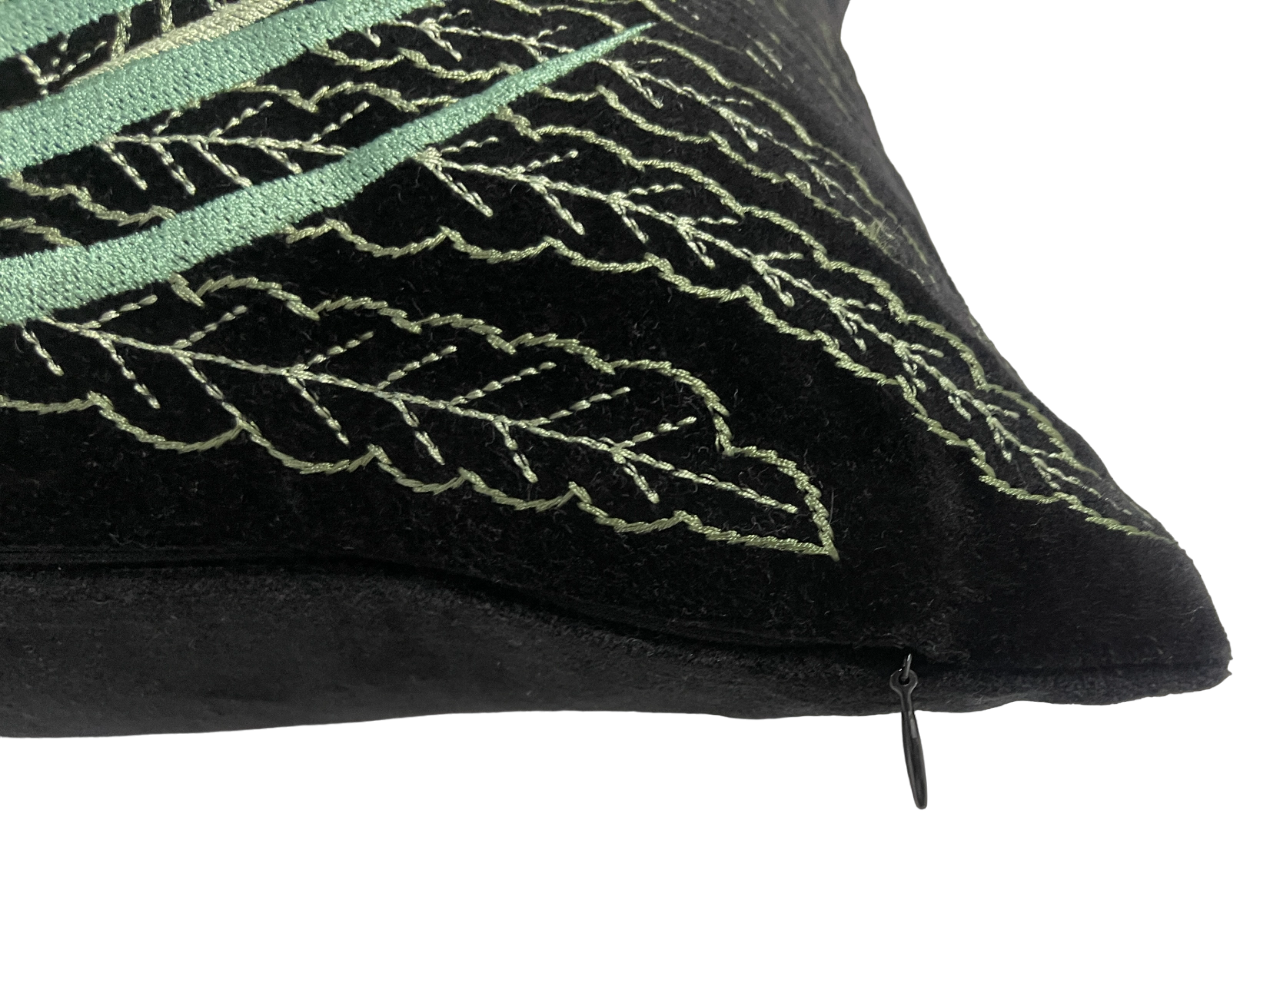 Amazon Forest Embroidered Black Green Leaves Cushion Cover